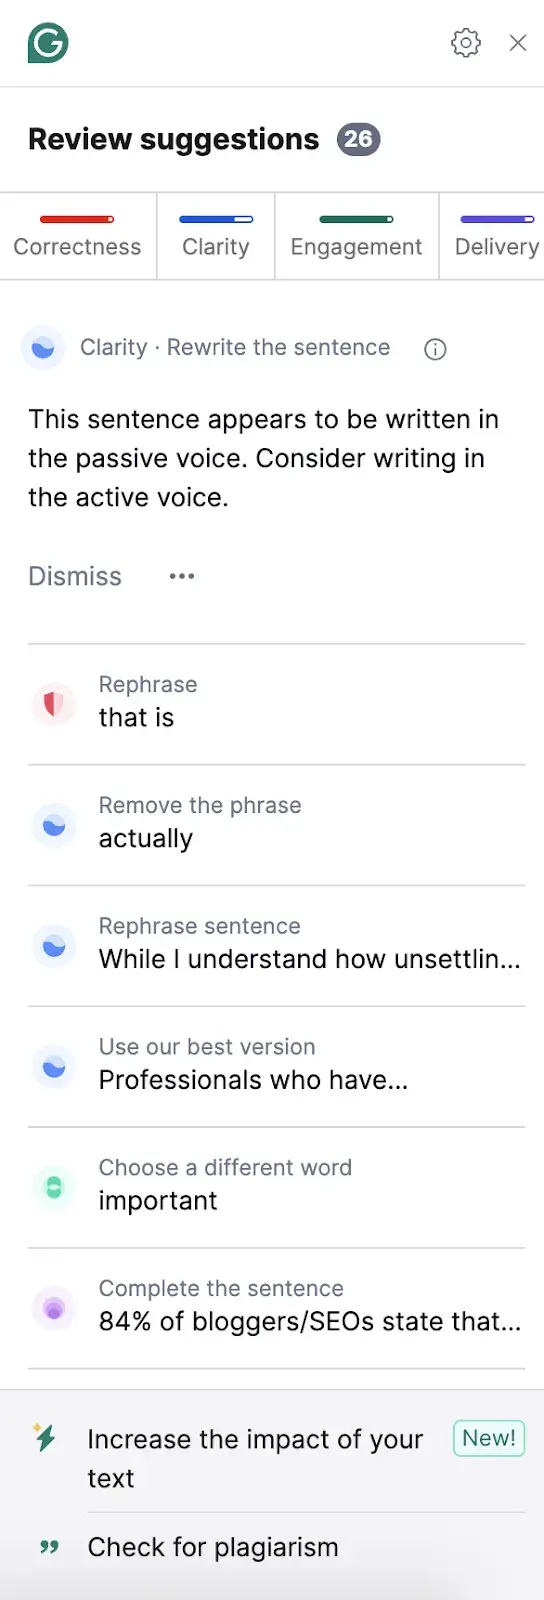 Screenshot from Grammarly AI tool for productivity showing suggestion feature